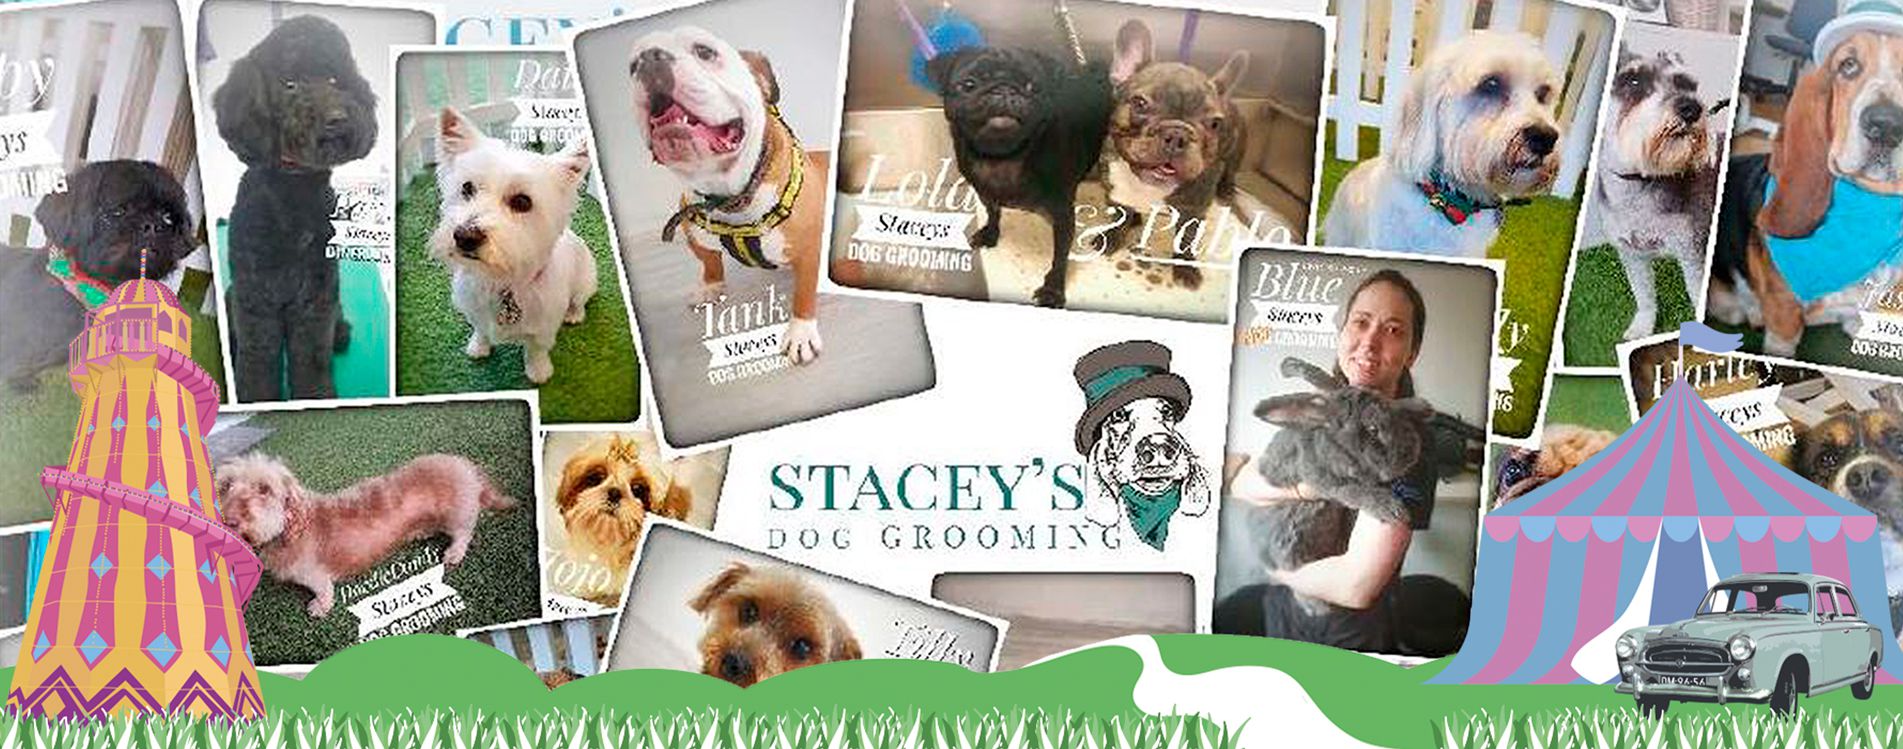 Stacey's Dog Grooming Leyland